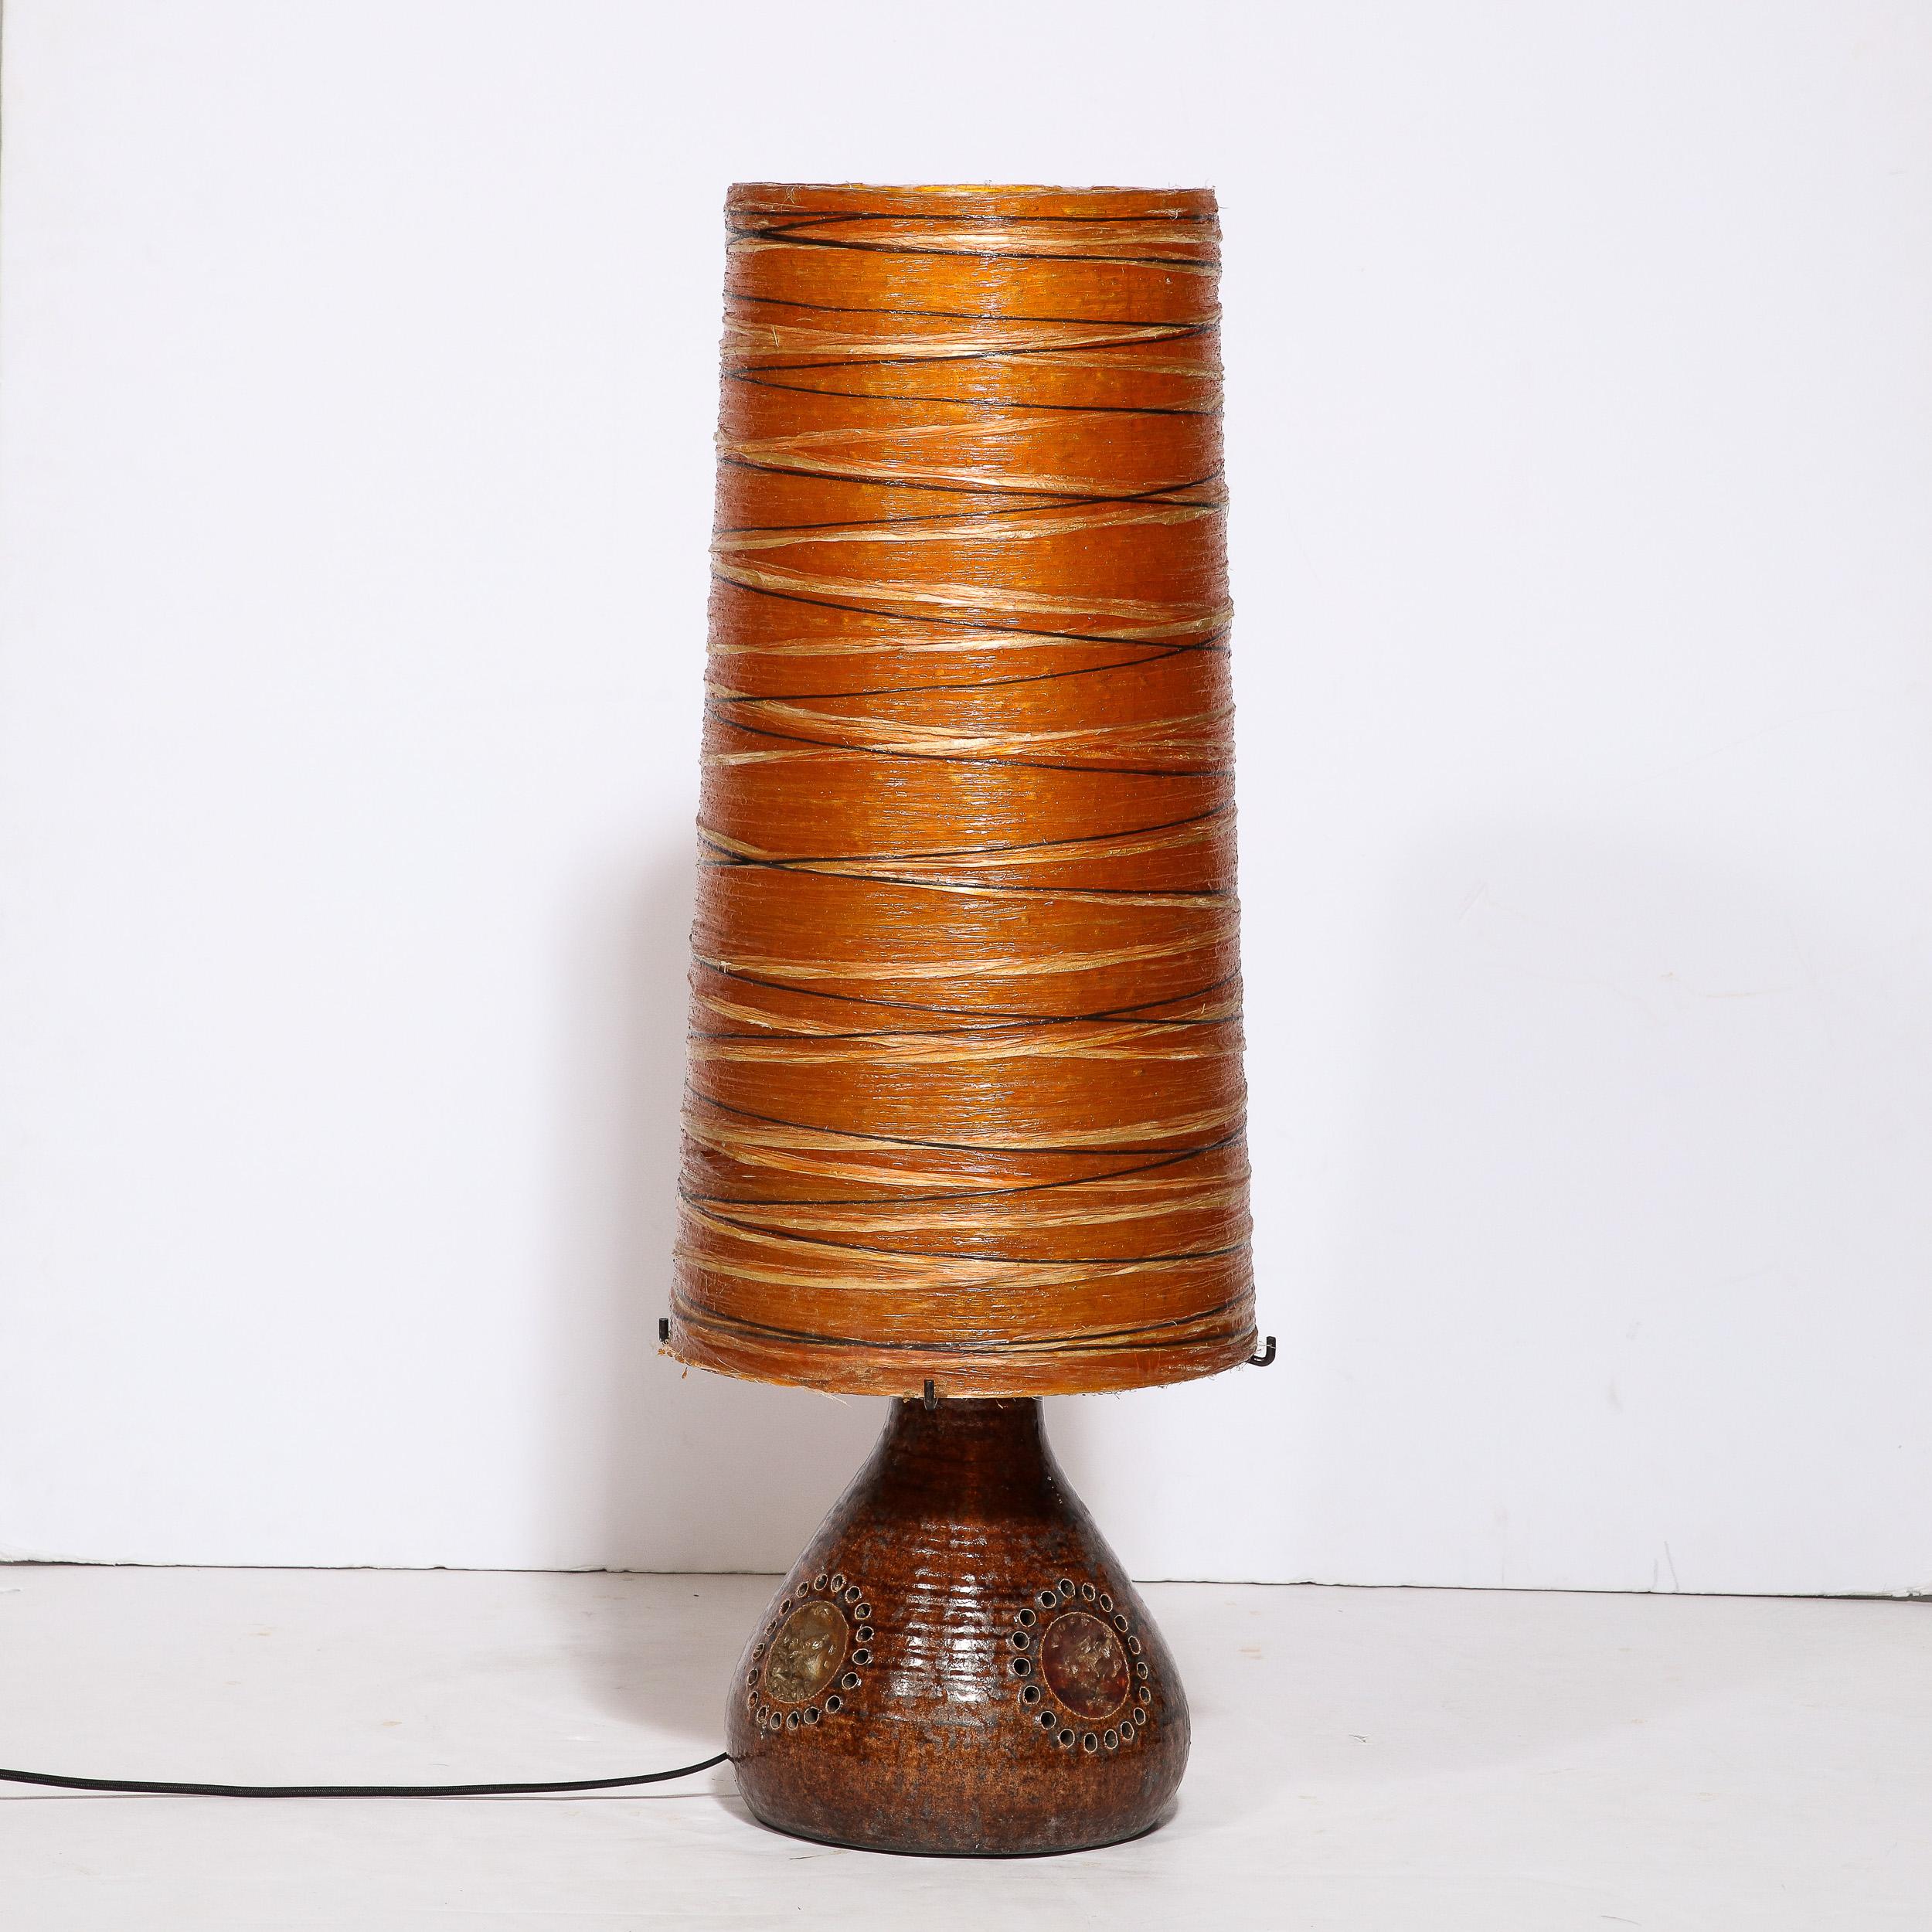 Midcentury Brutalist Ceramic Table Lamp with Horizontally Striated Resin Shade For Sale 8